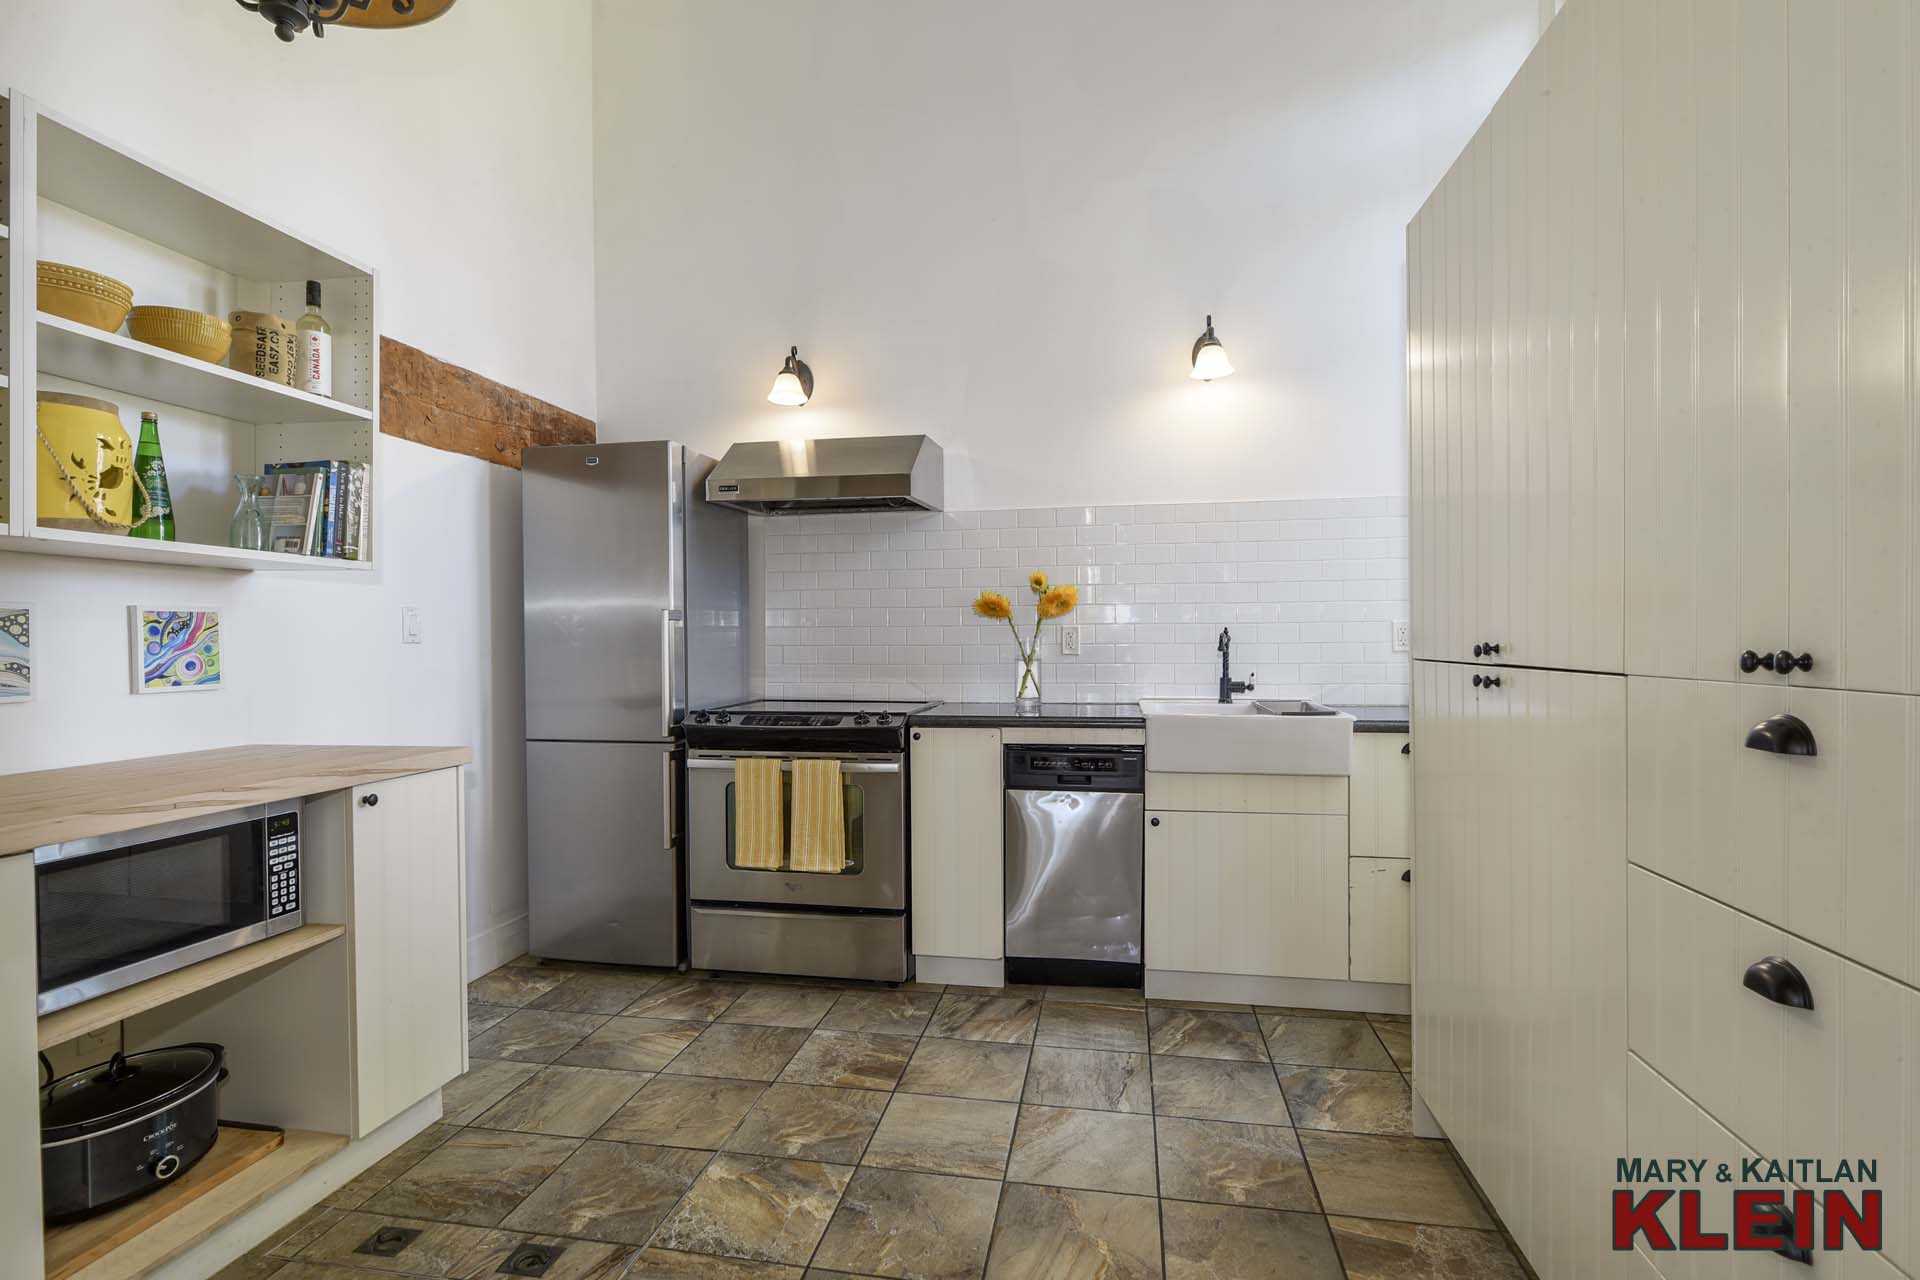 Kitchen - Ceramic flooring, Soaring Ceiling, Stainless Appliances